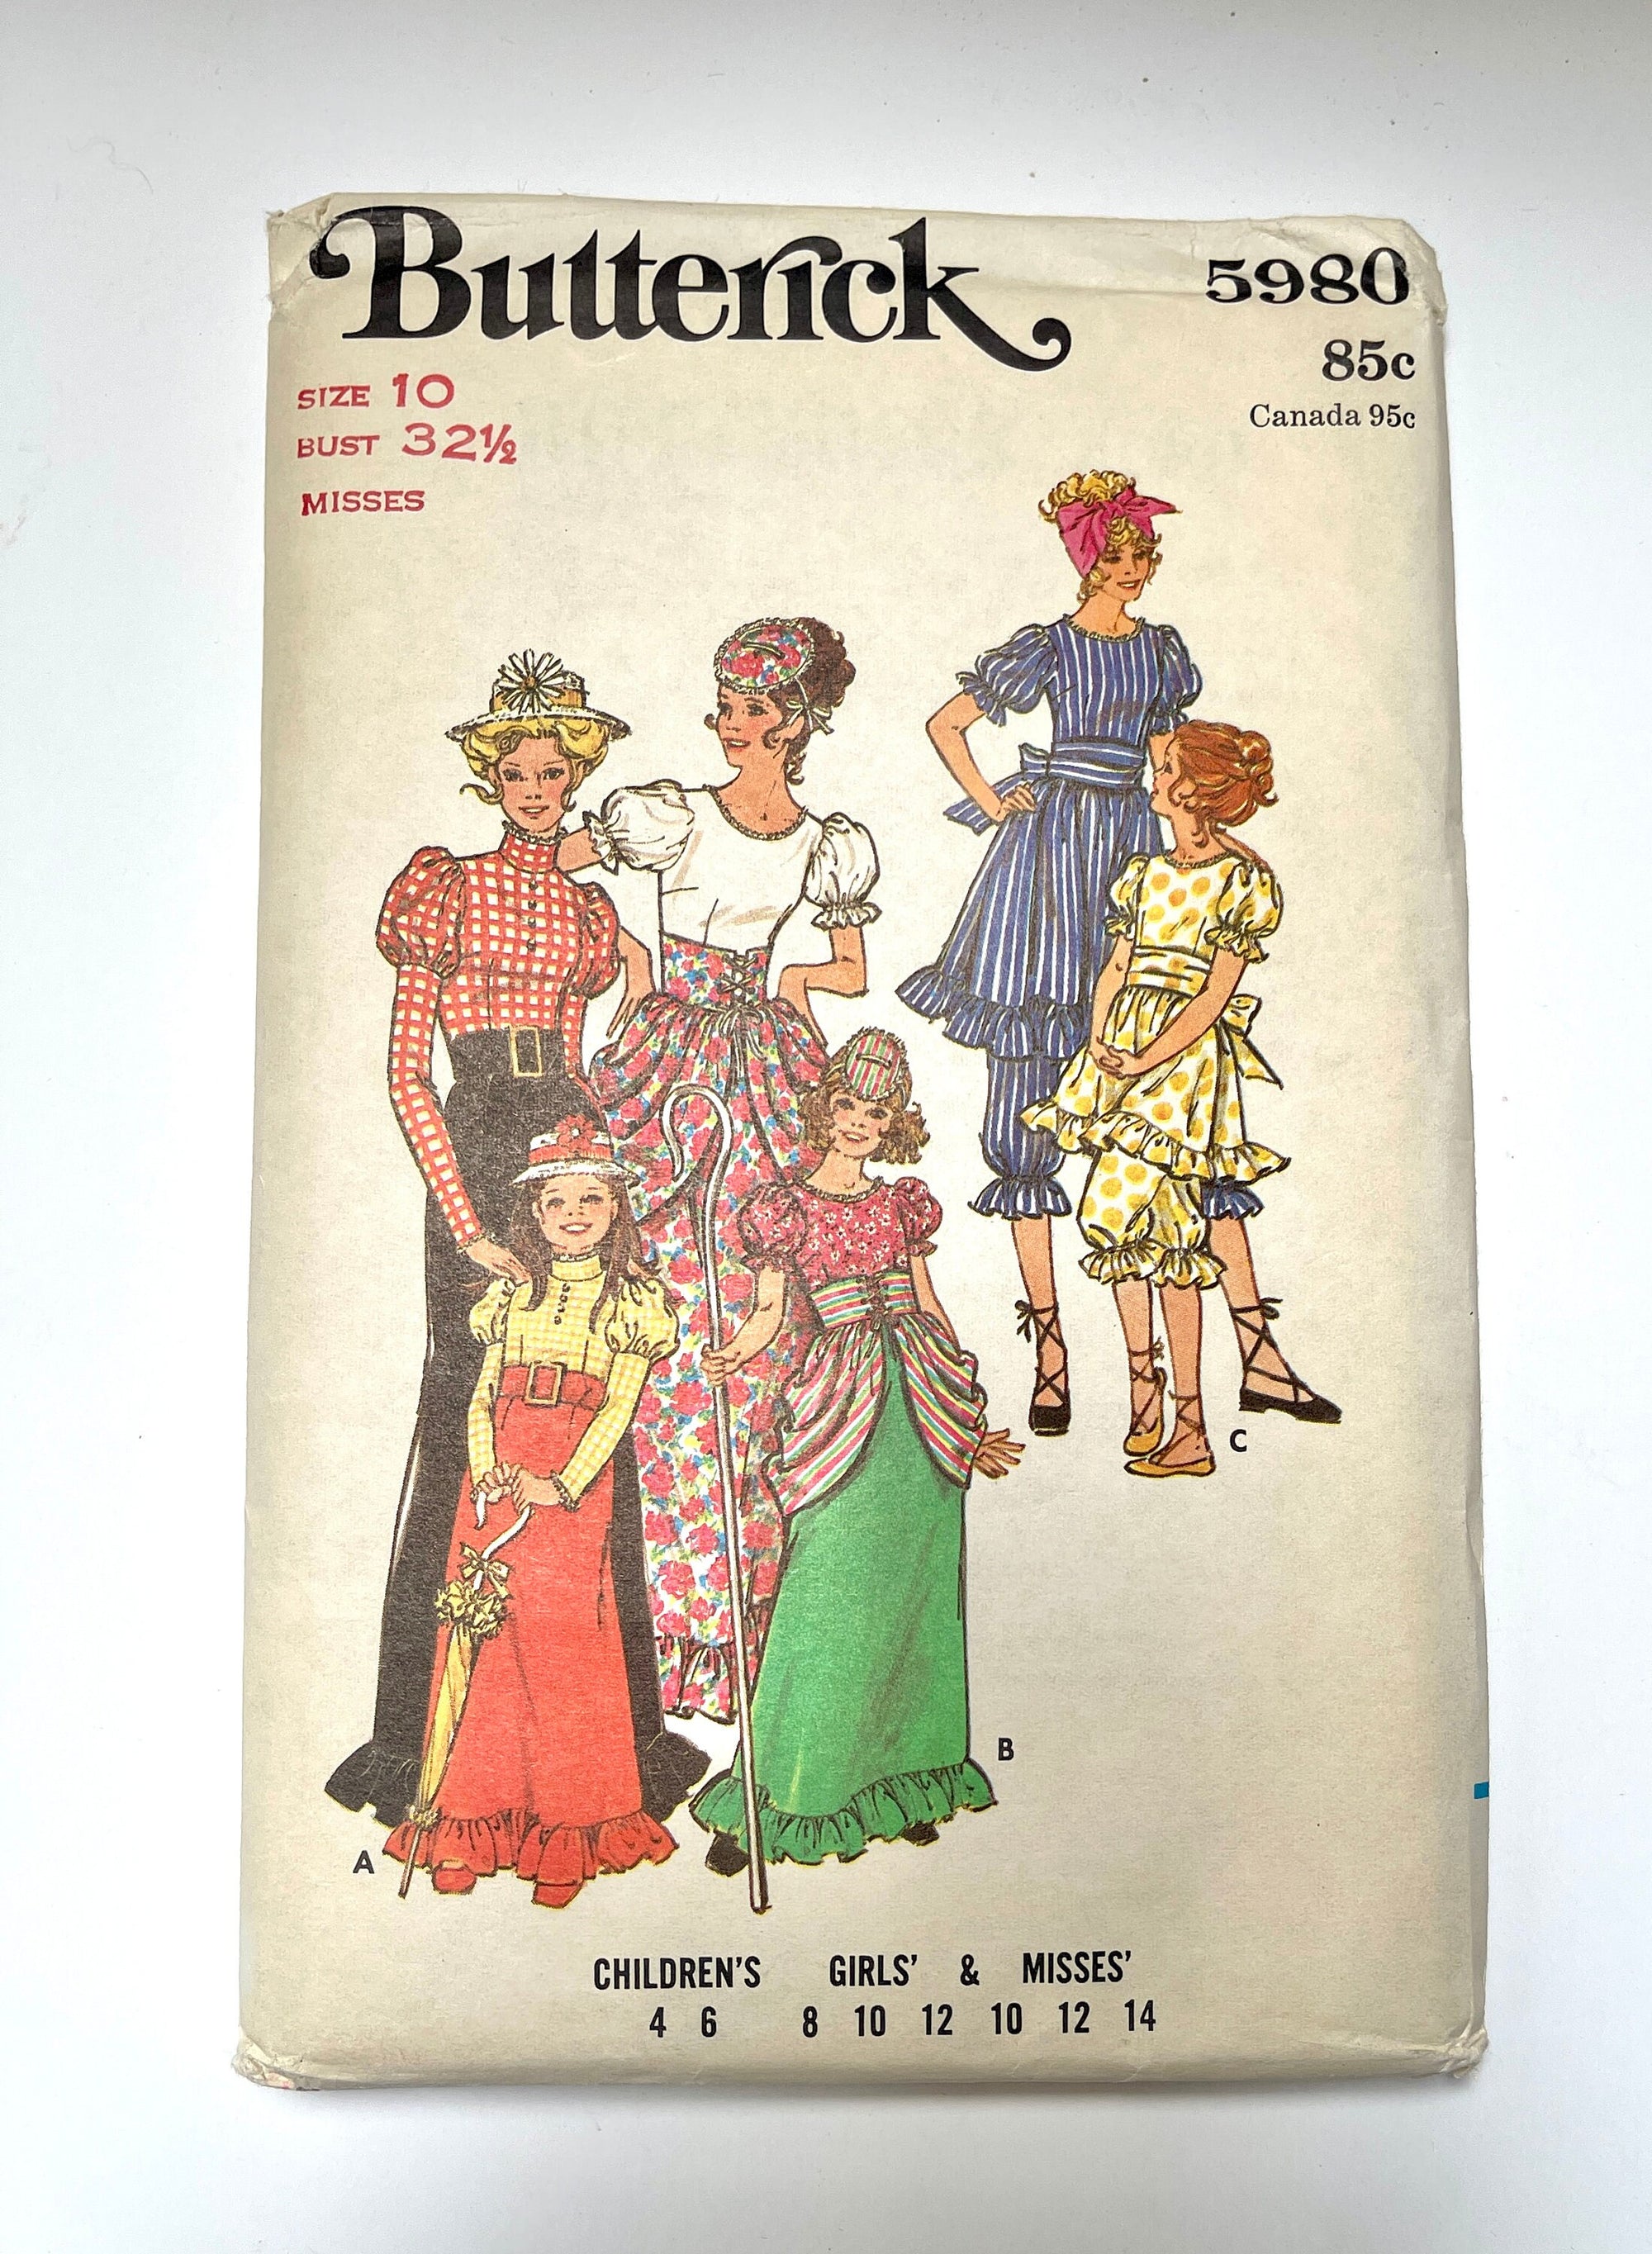 Butterick 5980 ©1970; Girls' Historical Costumes Size 10 Bust 32 1/2 New FF